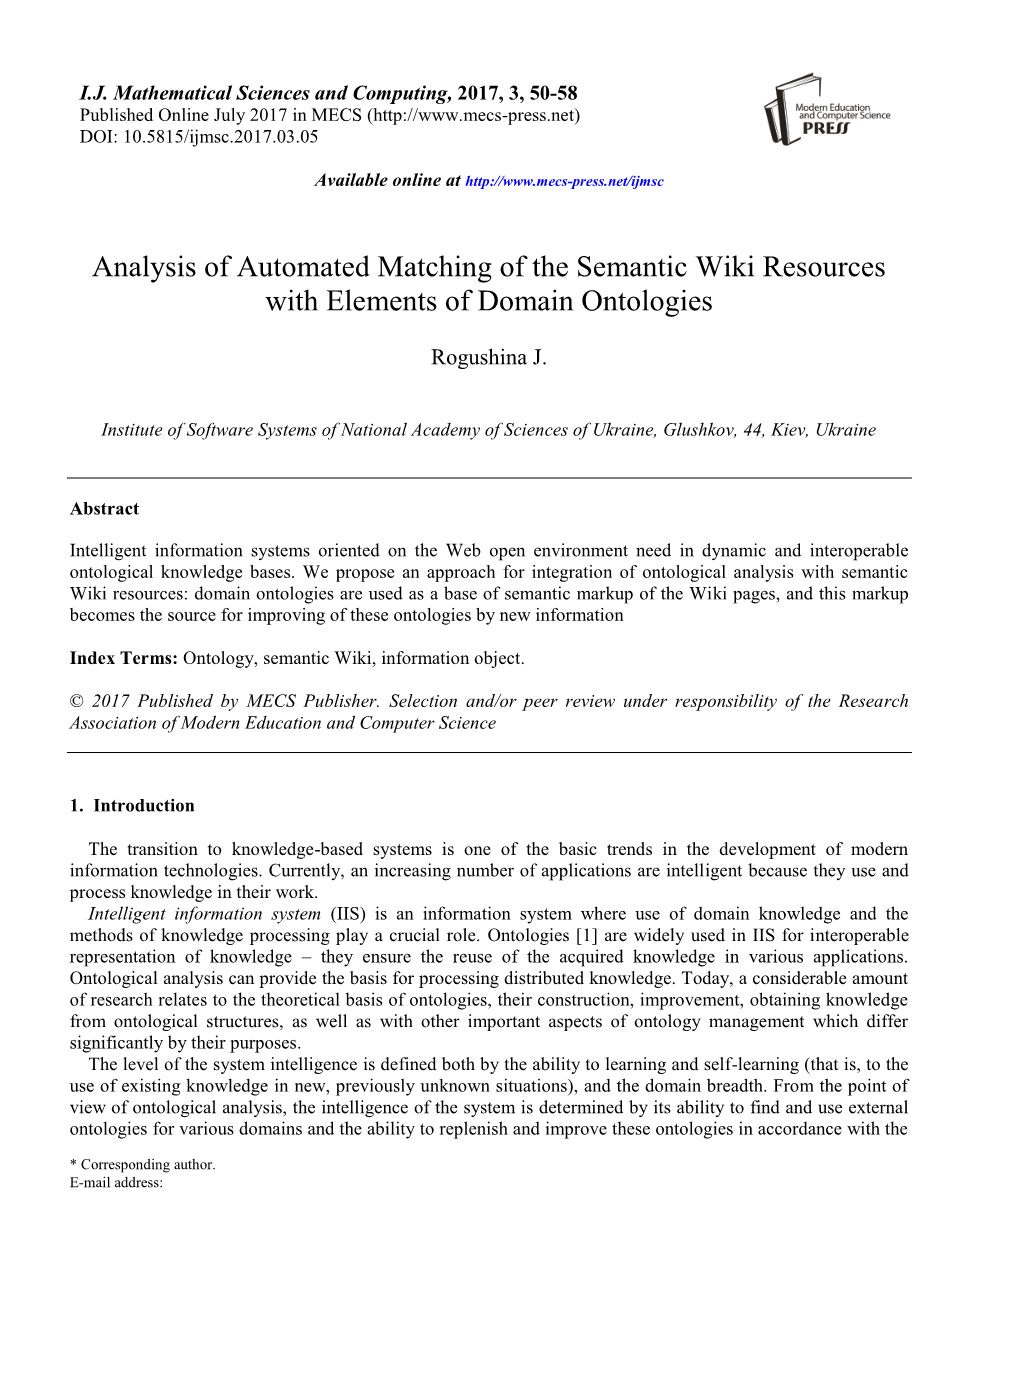 Analysis of Automated Matching of the Semantic Wiki Resources with Elements of Domain Ontologies